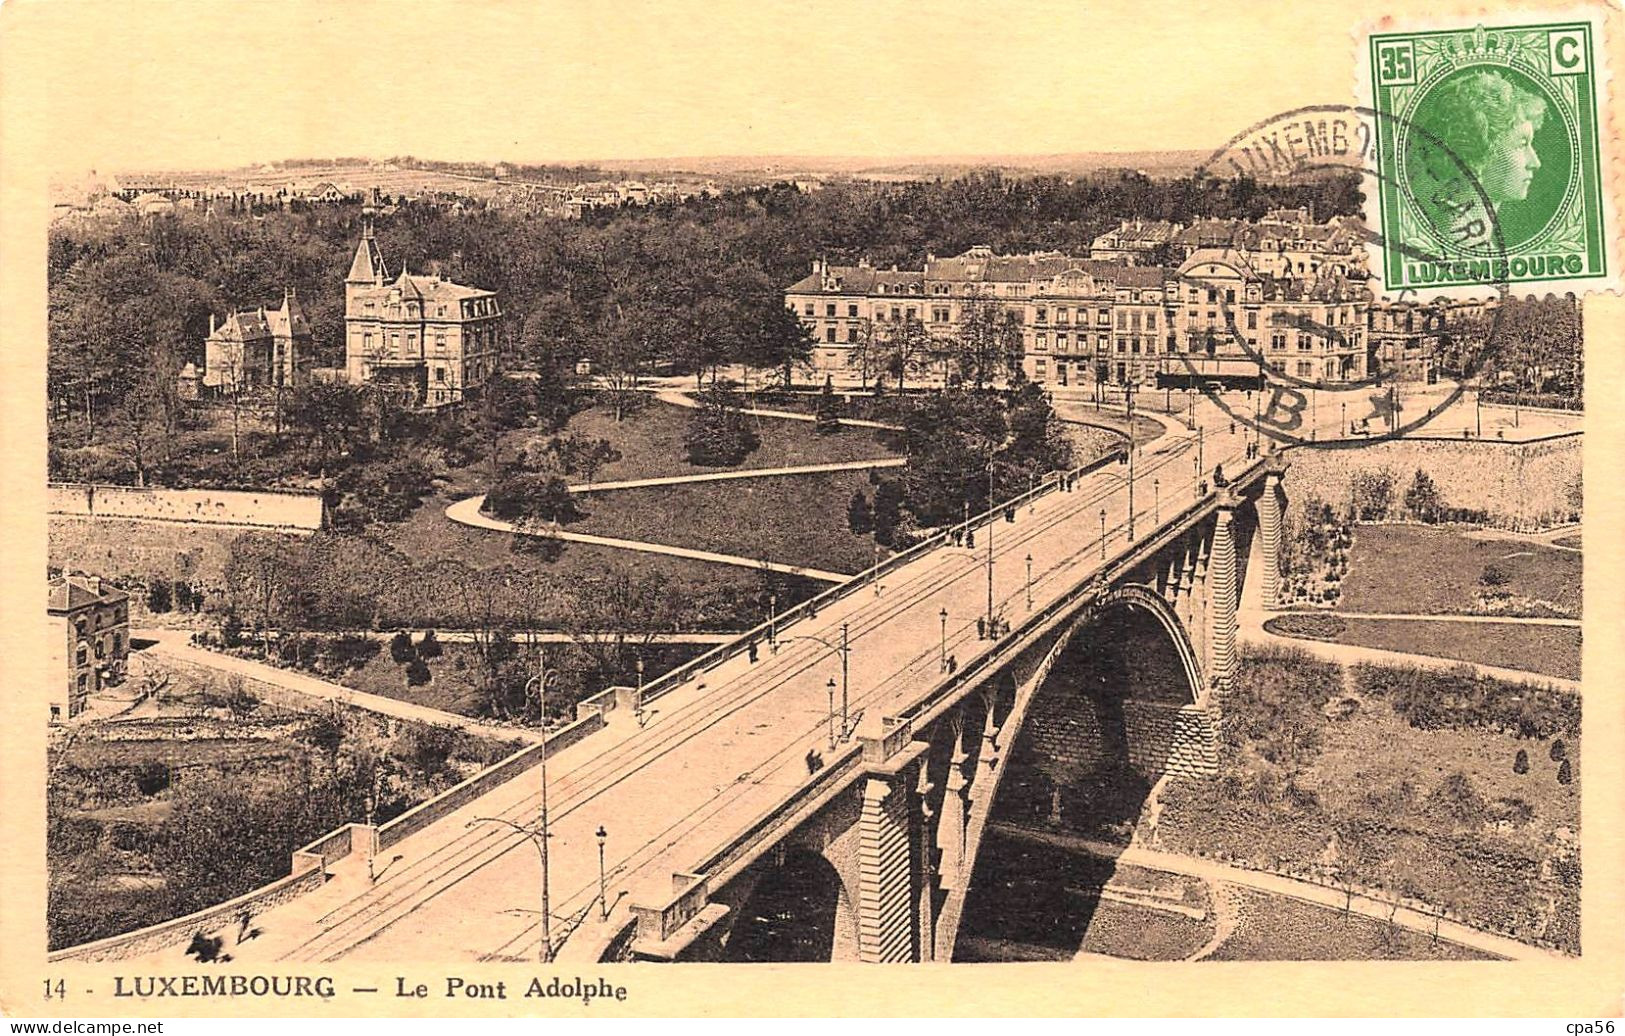 Le PONT ADOLPHE - LUXEMBOURG - Cachet LUXEMBOURG GARE B - Luxemburg - Stadt